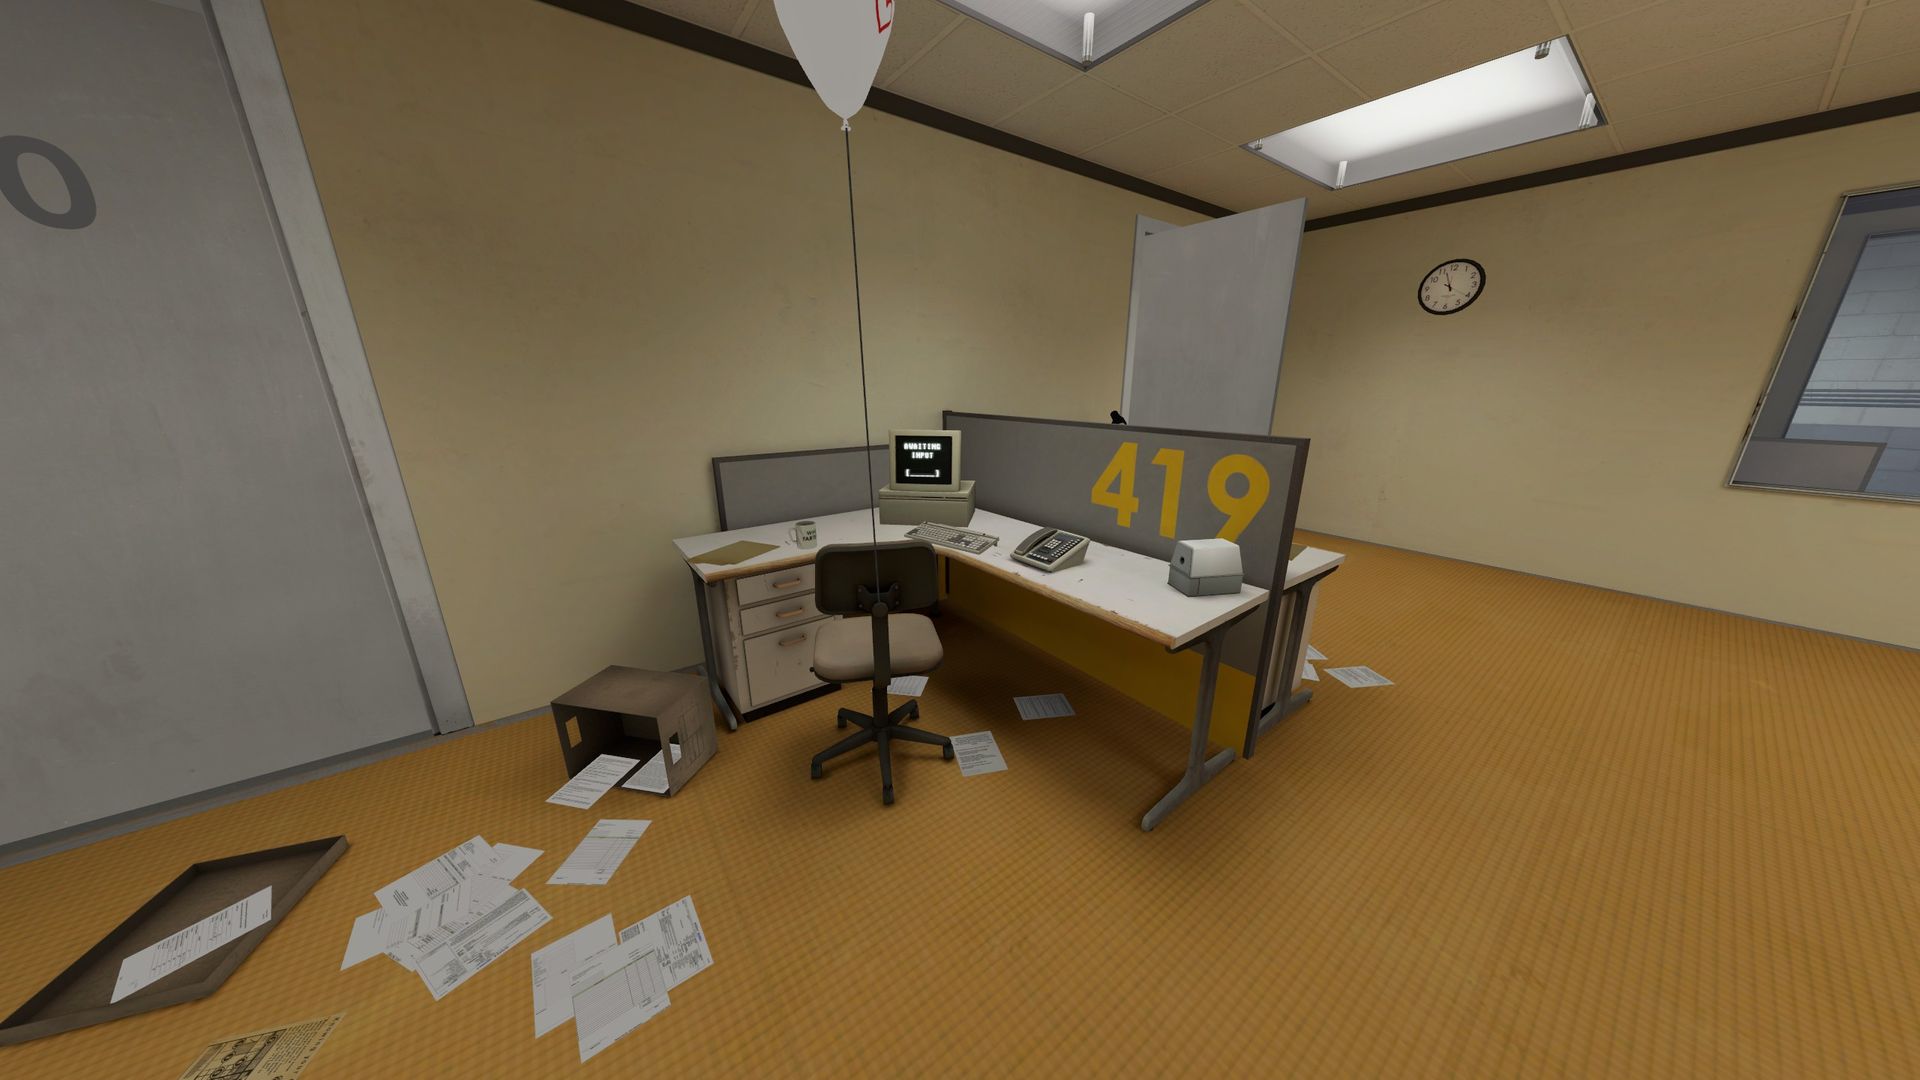 The Stanley Parable Ultra Deluxe Endings